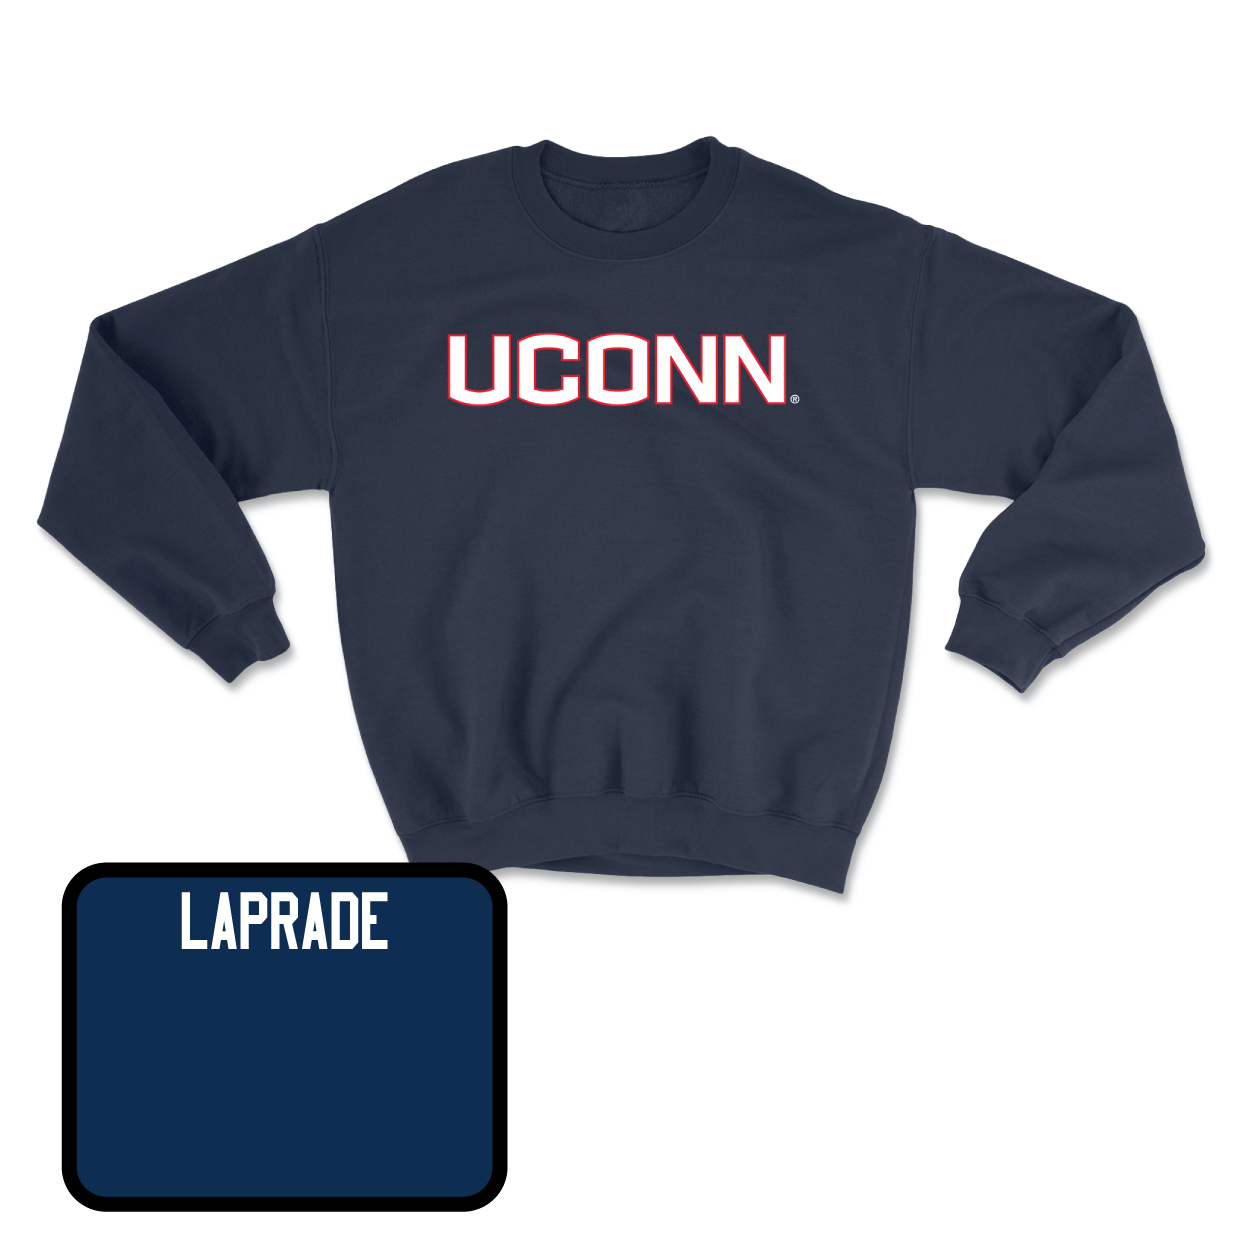 Navy Women's Rowing UConn Crewneck Small / Madelyn Laprade